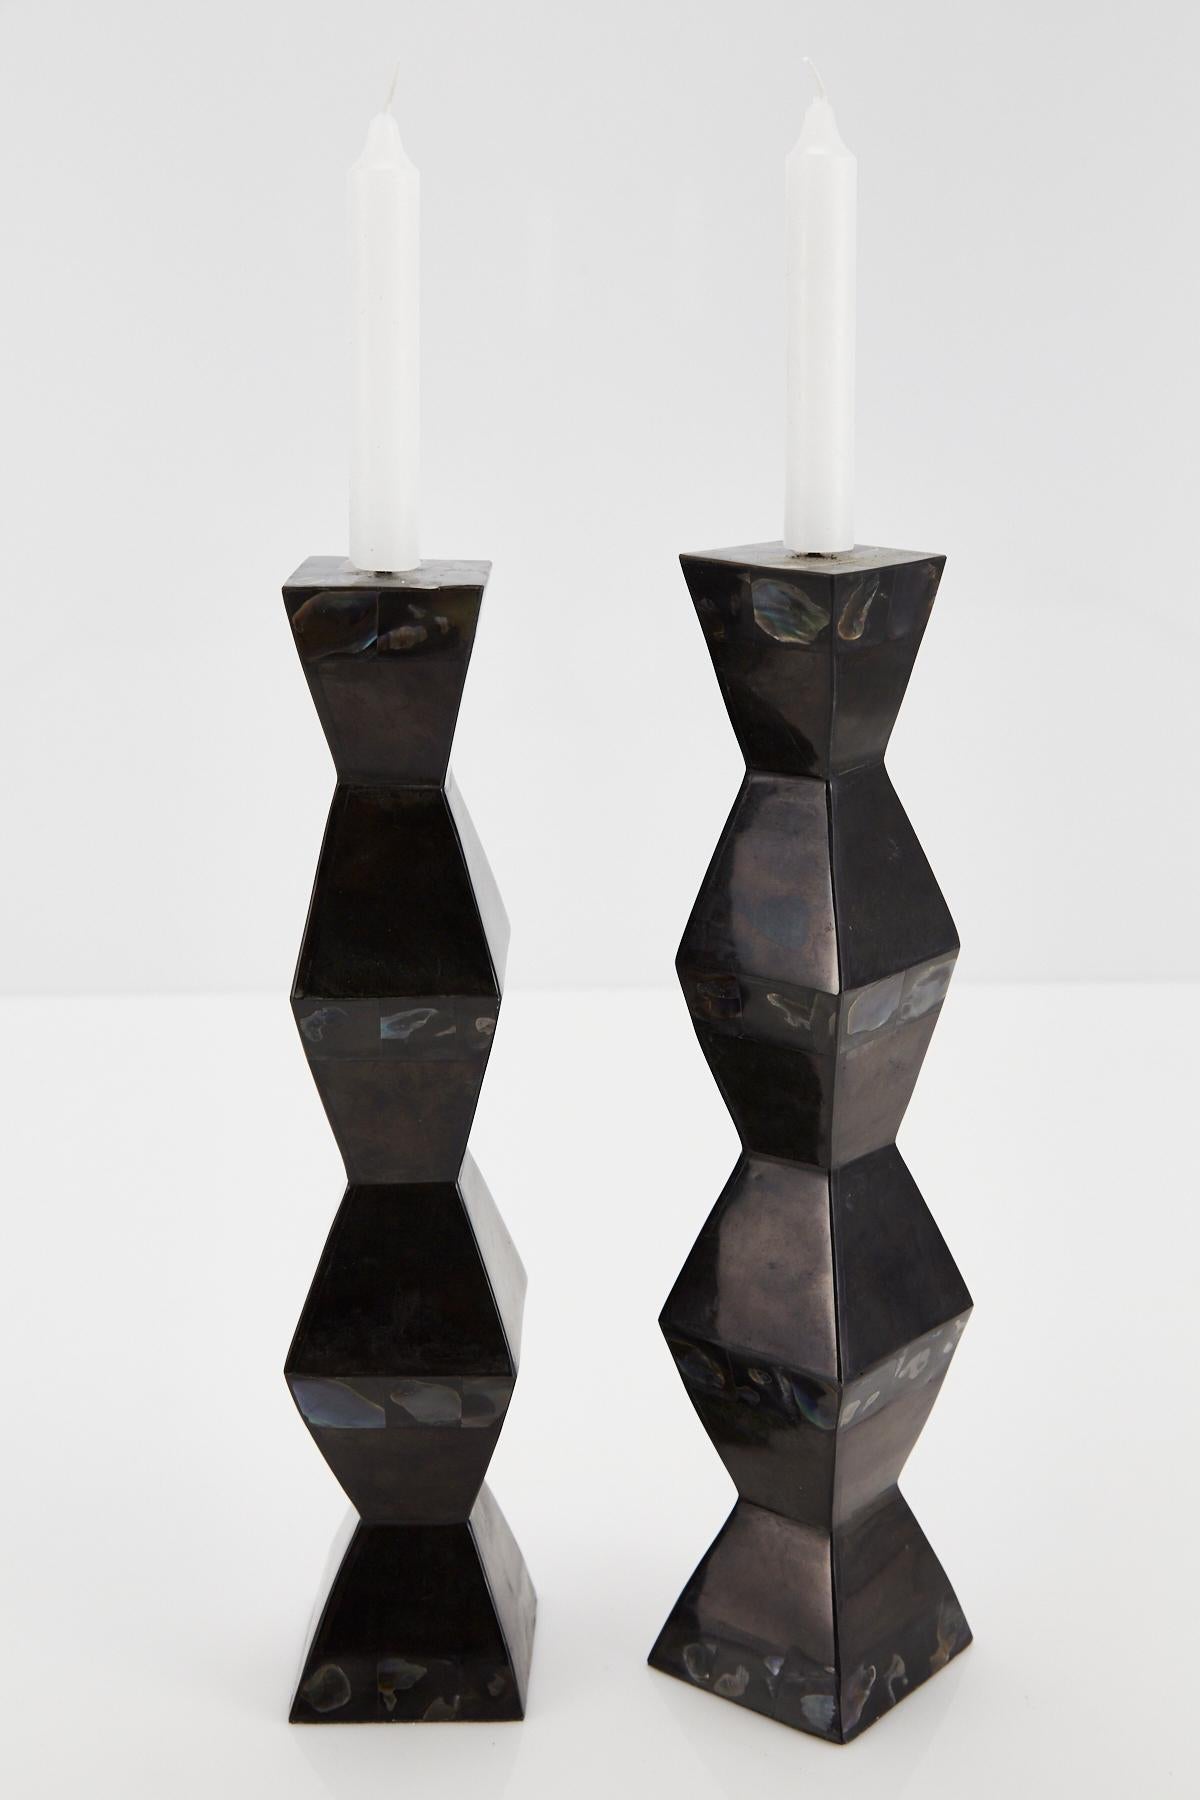 Striking pair of accordion shaped candleholders, completely covered in tessellated black stone and rainbow seashell.

All furnishings are made from 100% natural Fossil Stone or Seashell inlay, carefully hand cut and crafted piece-by-piece and